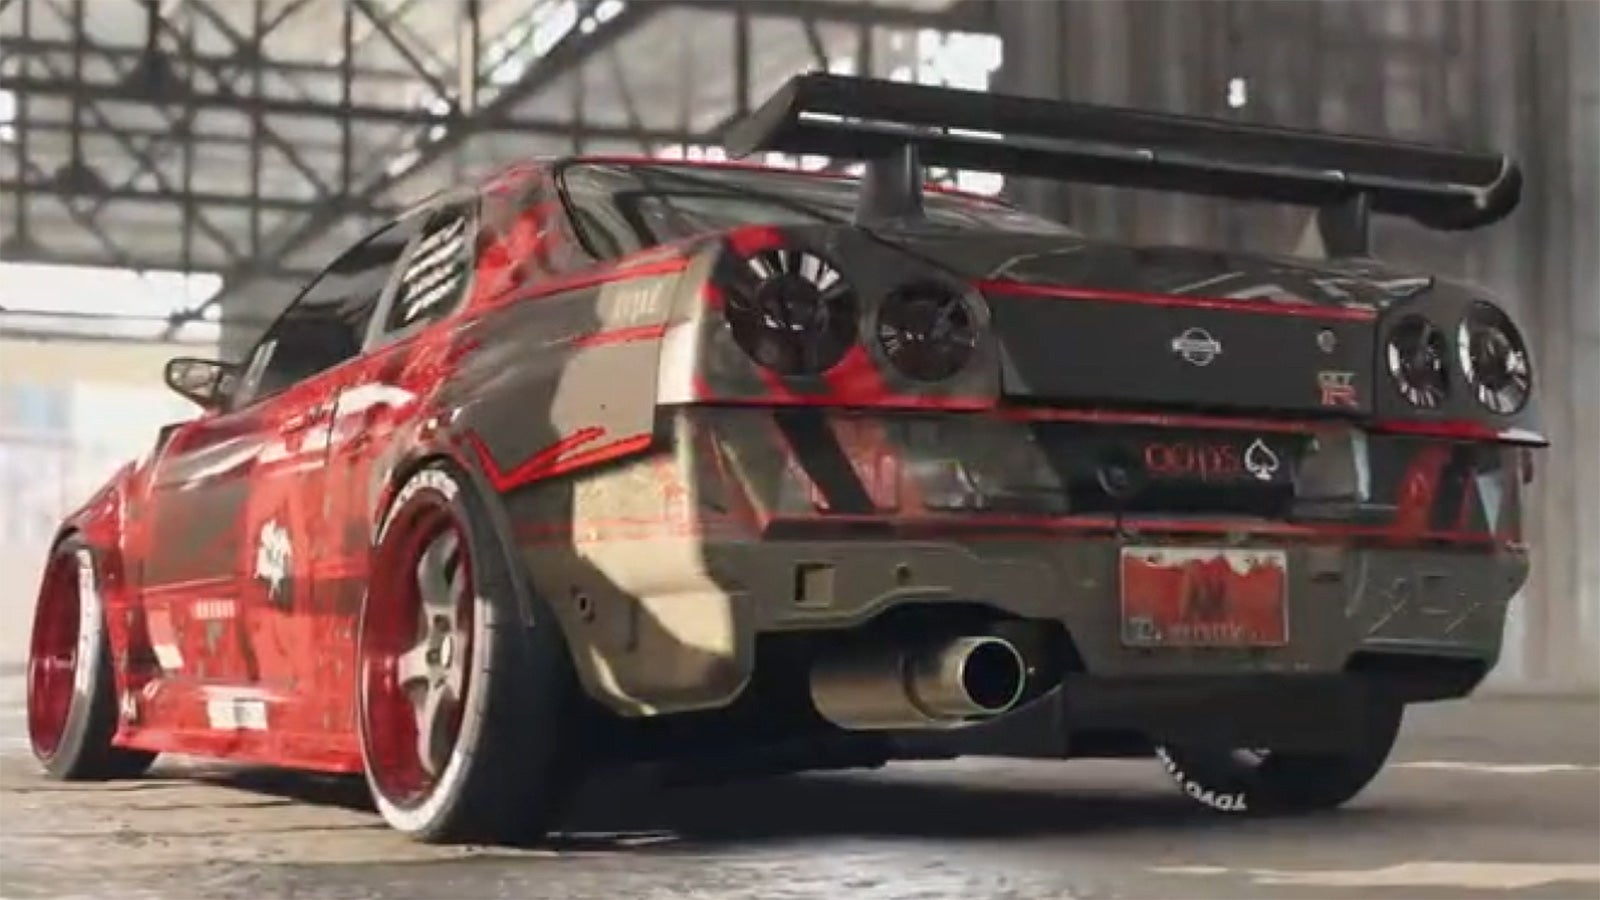 You’ll Be Able to Build and Customize Pretty Ridiculous Rides in NFS Unbound